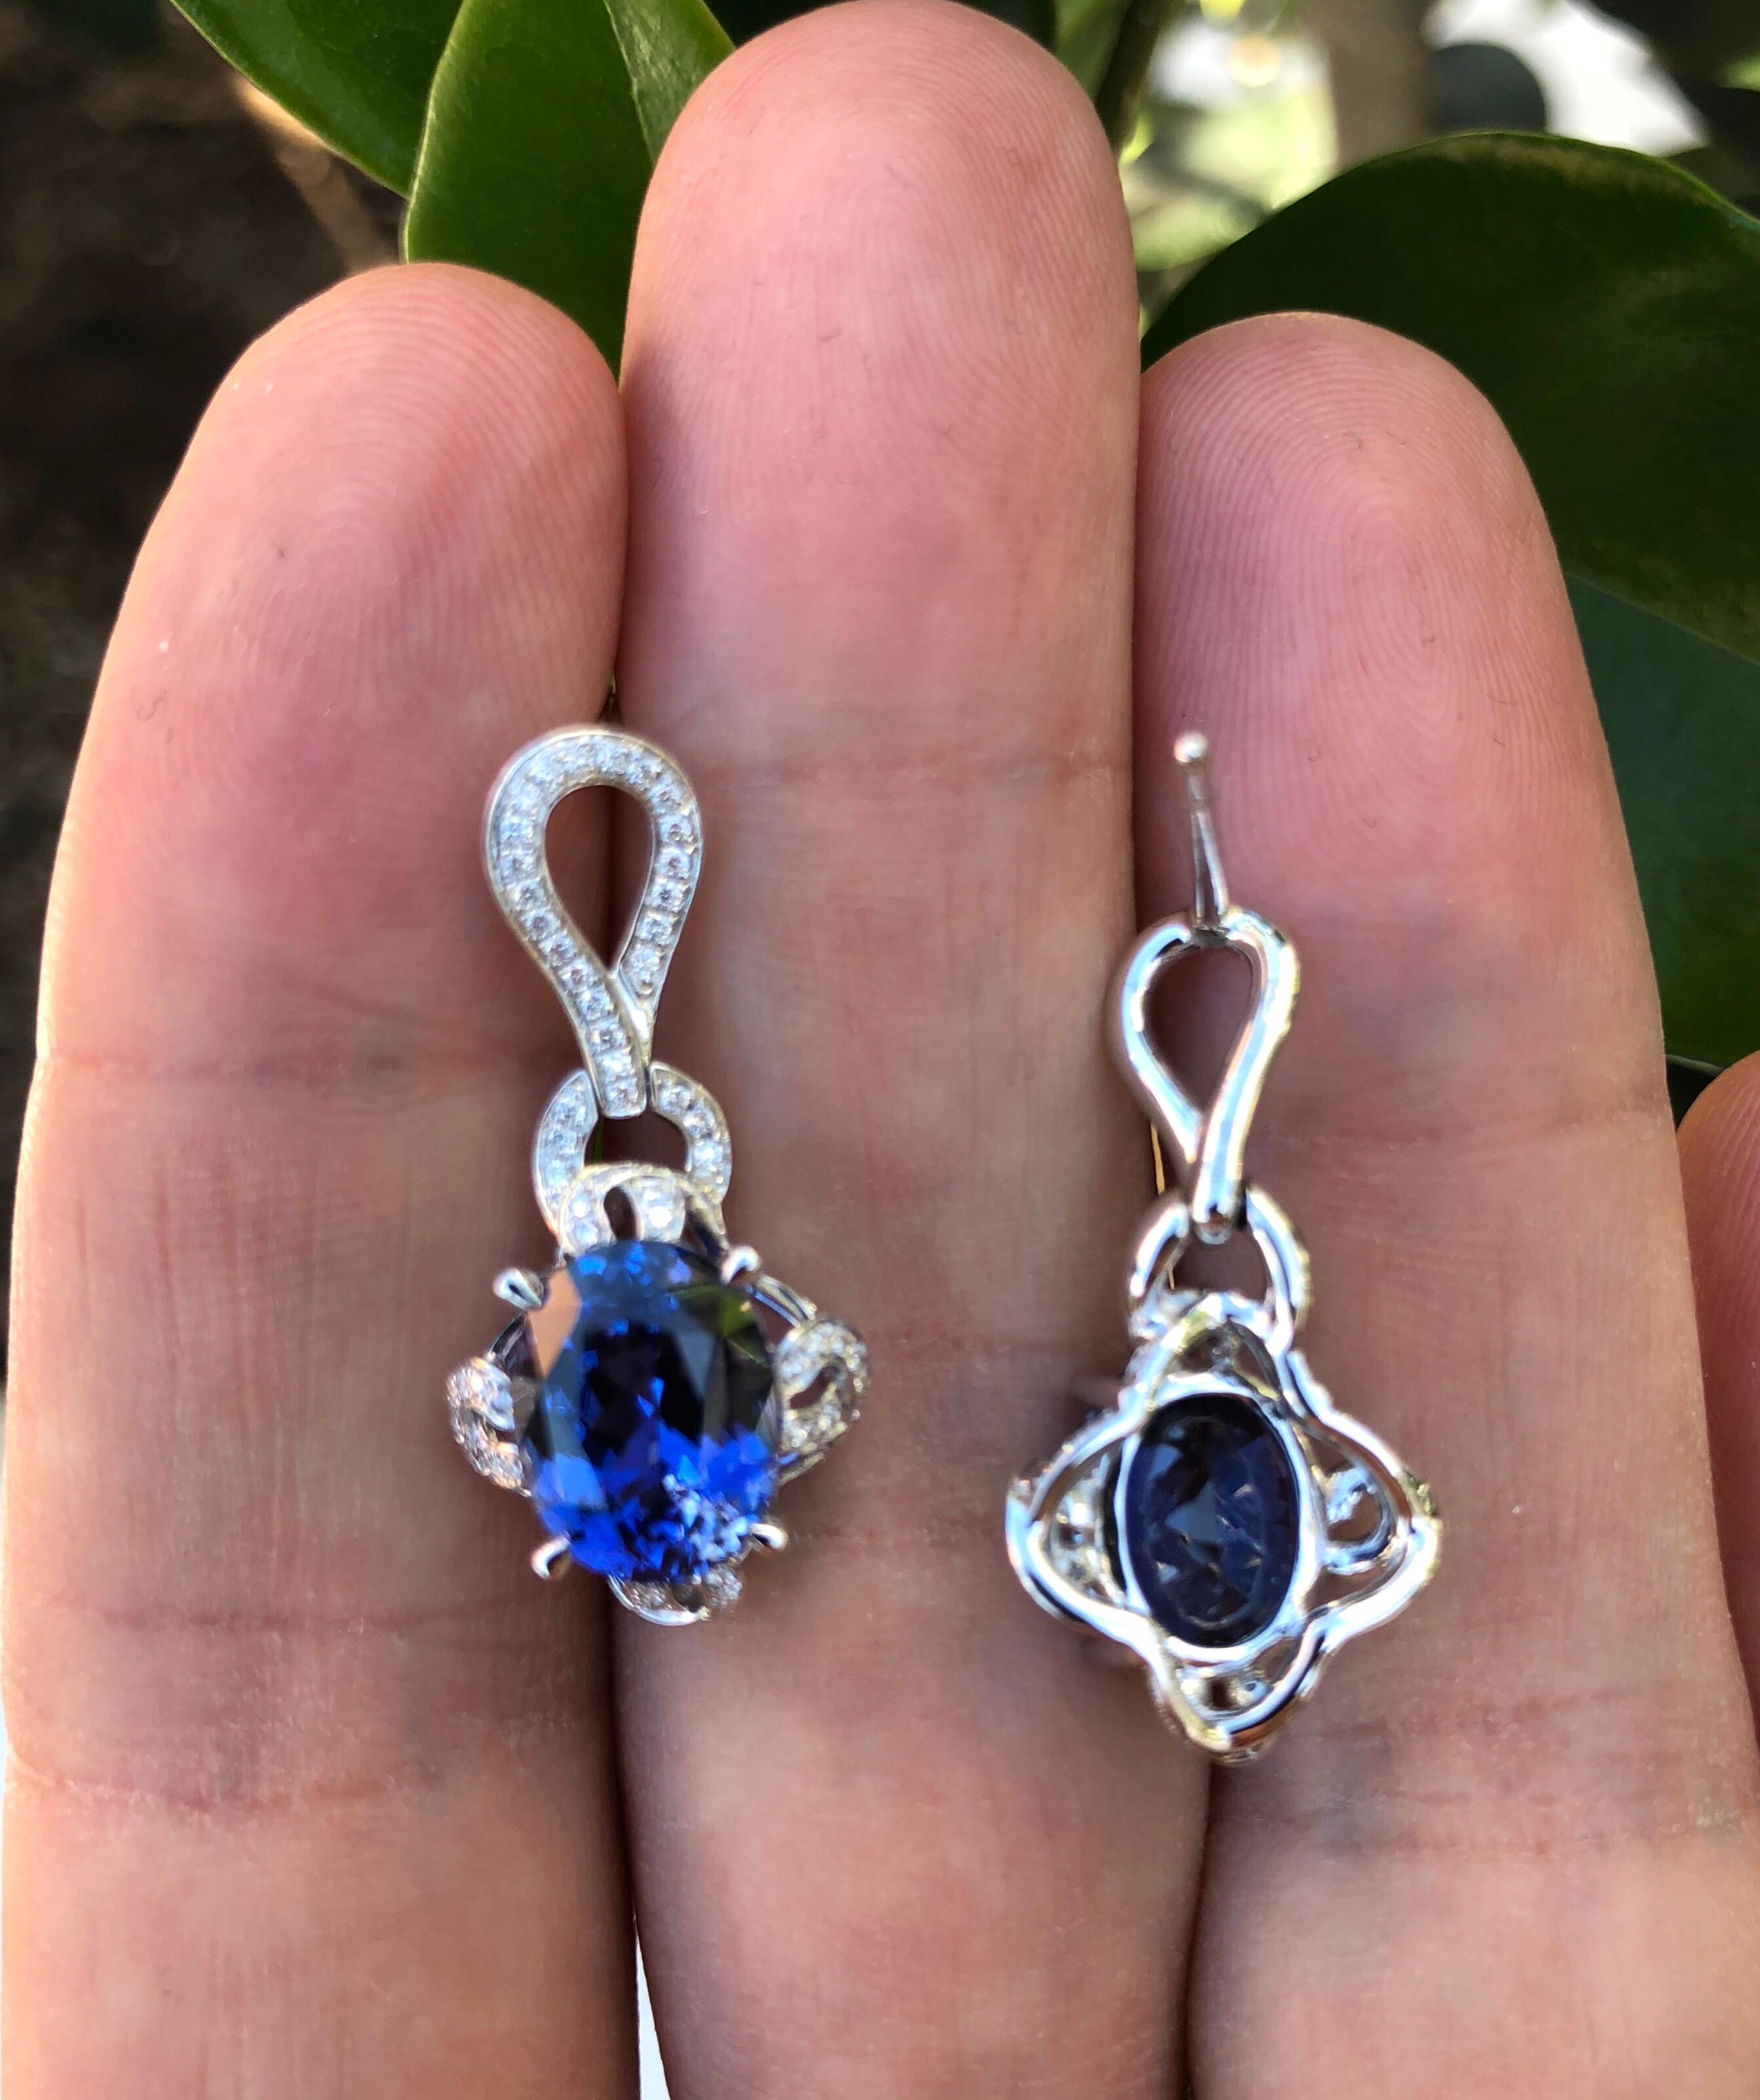 Sapphire earrings showcasing a gorgeous pair of oval blue Sapphires weighing a total of 7.34 carats, and a total of 0.38 carat round brilliant diamonds
Length: 1 inch long.
Returns are accepted and paid by us within 7 days of delivery. 

Colorful